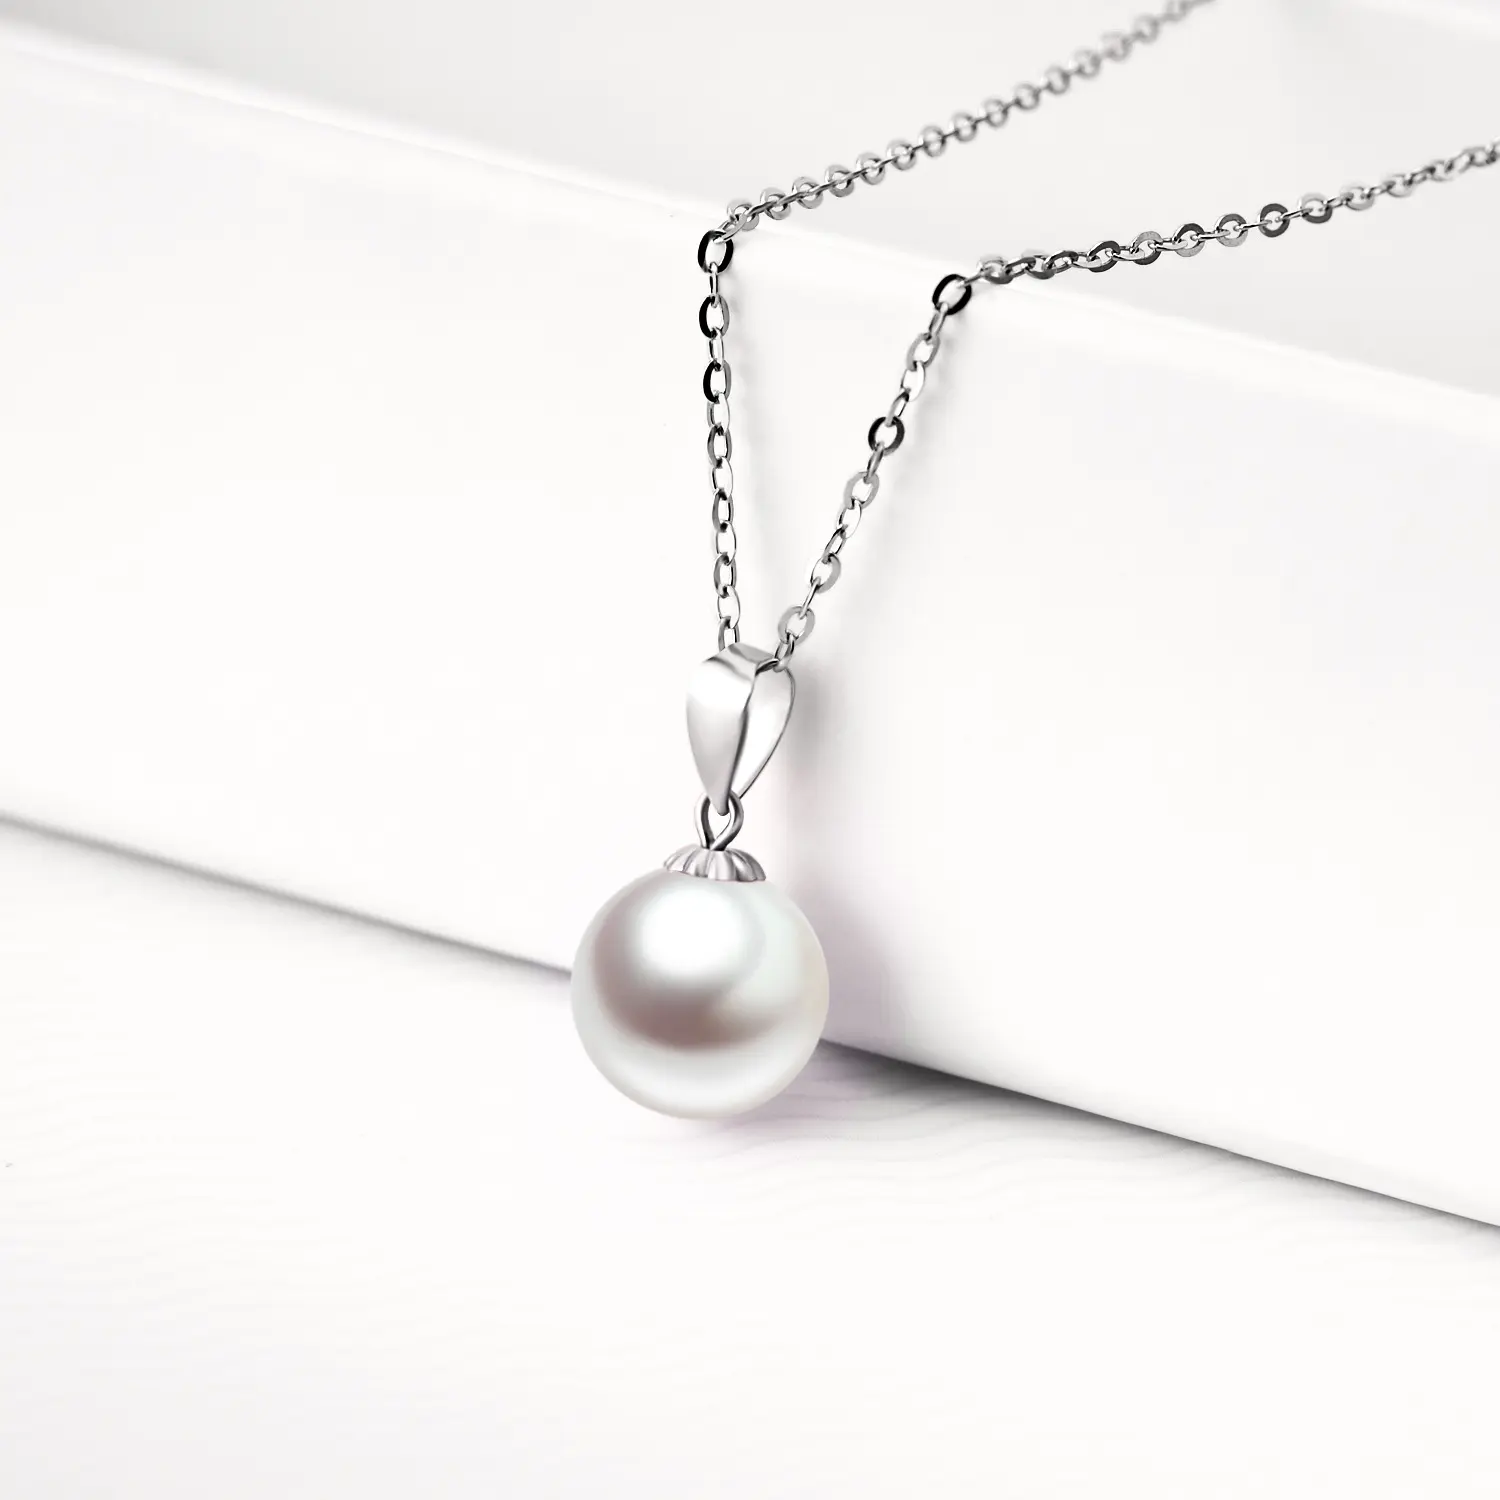 White Gold Rose Gold Yellow Gold Plated Freshwater Cultured Mother Of Pearl Pendant Necklace